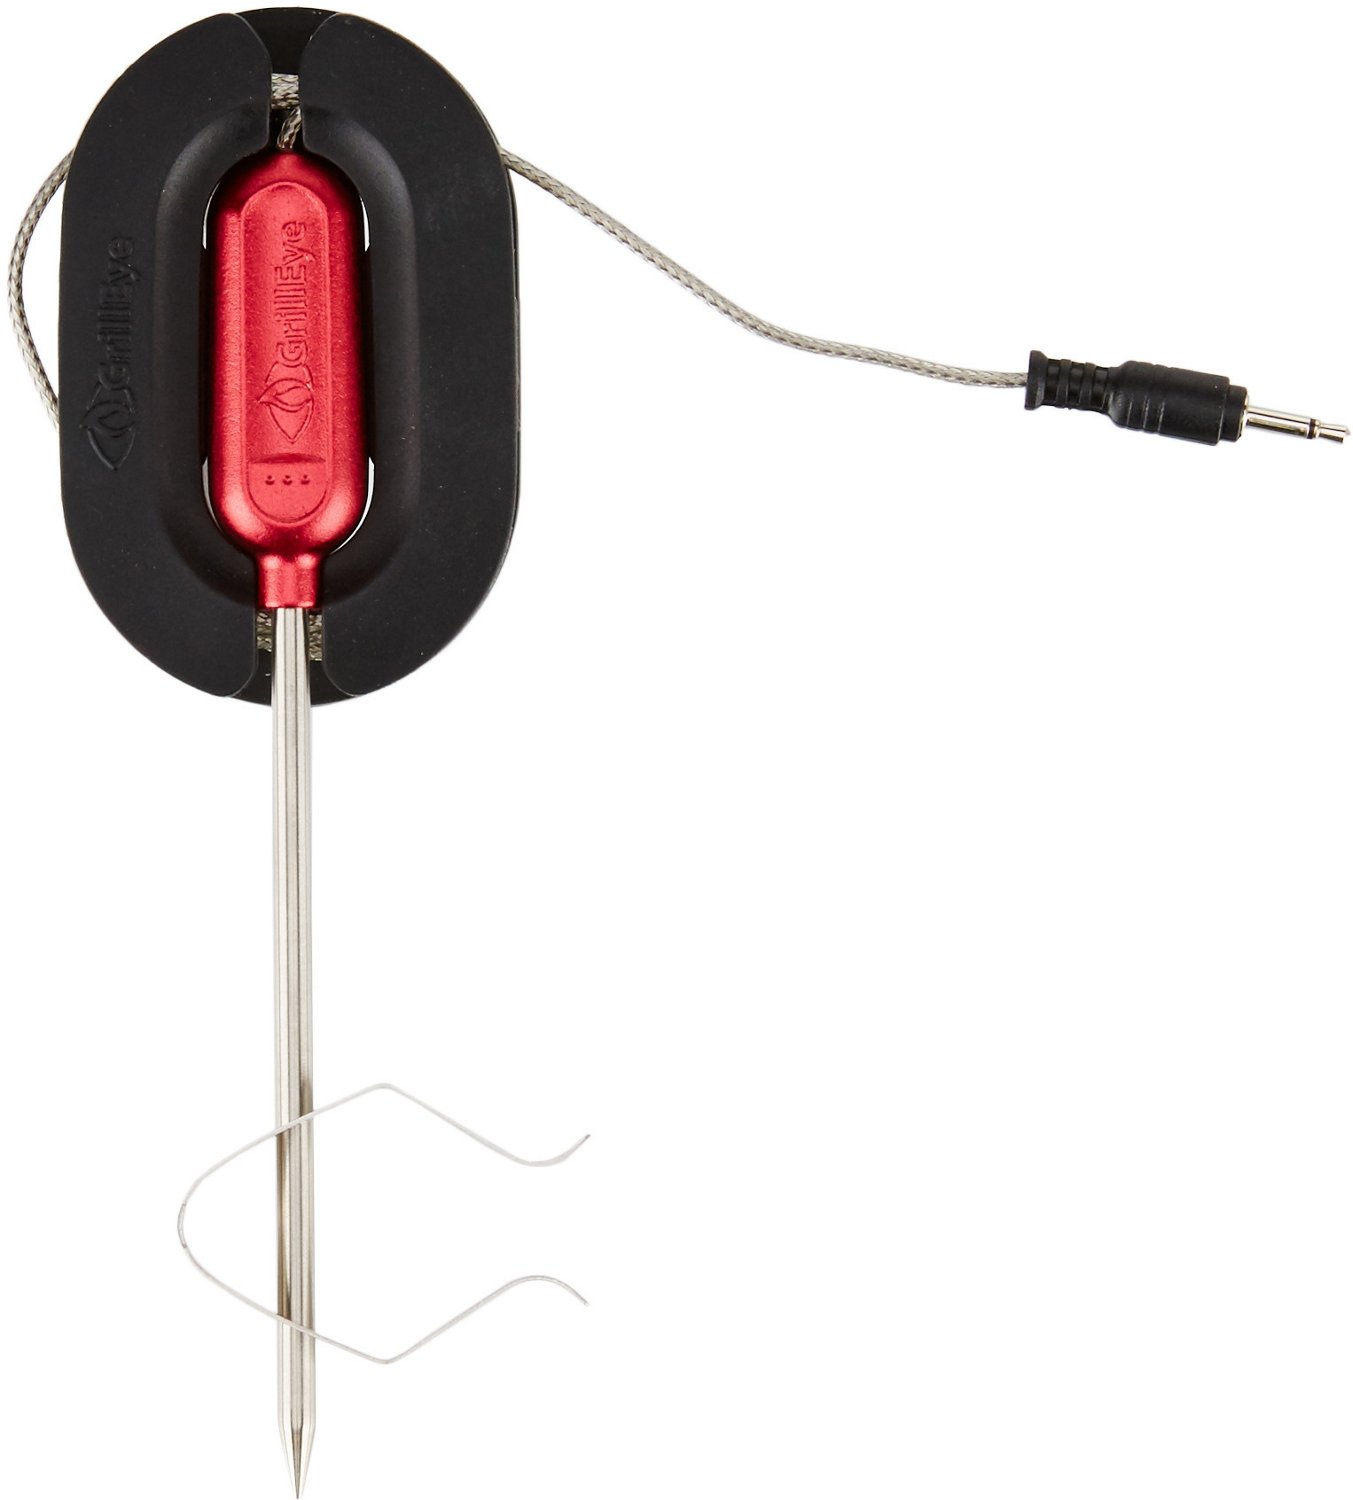 GrillEye Review - review of GrillEye Temperature Probe